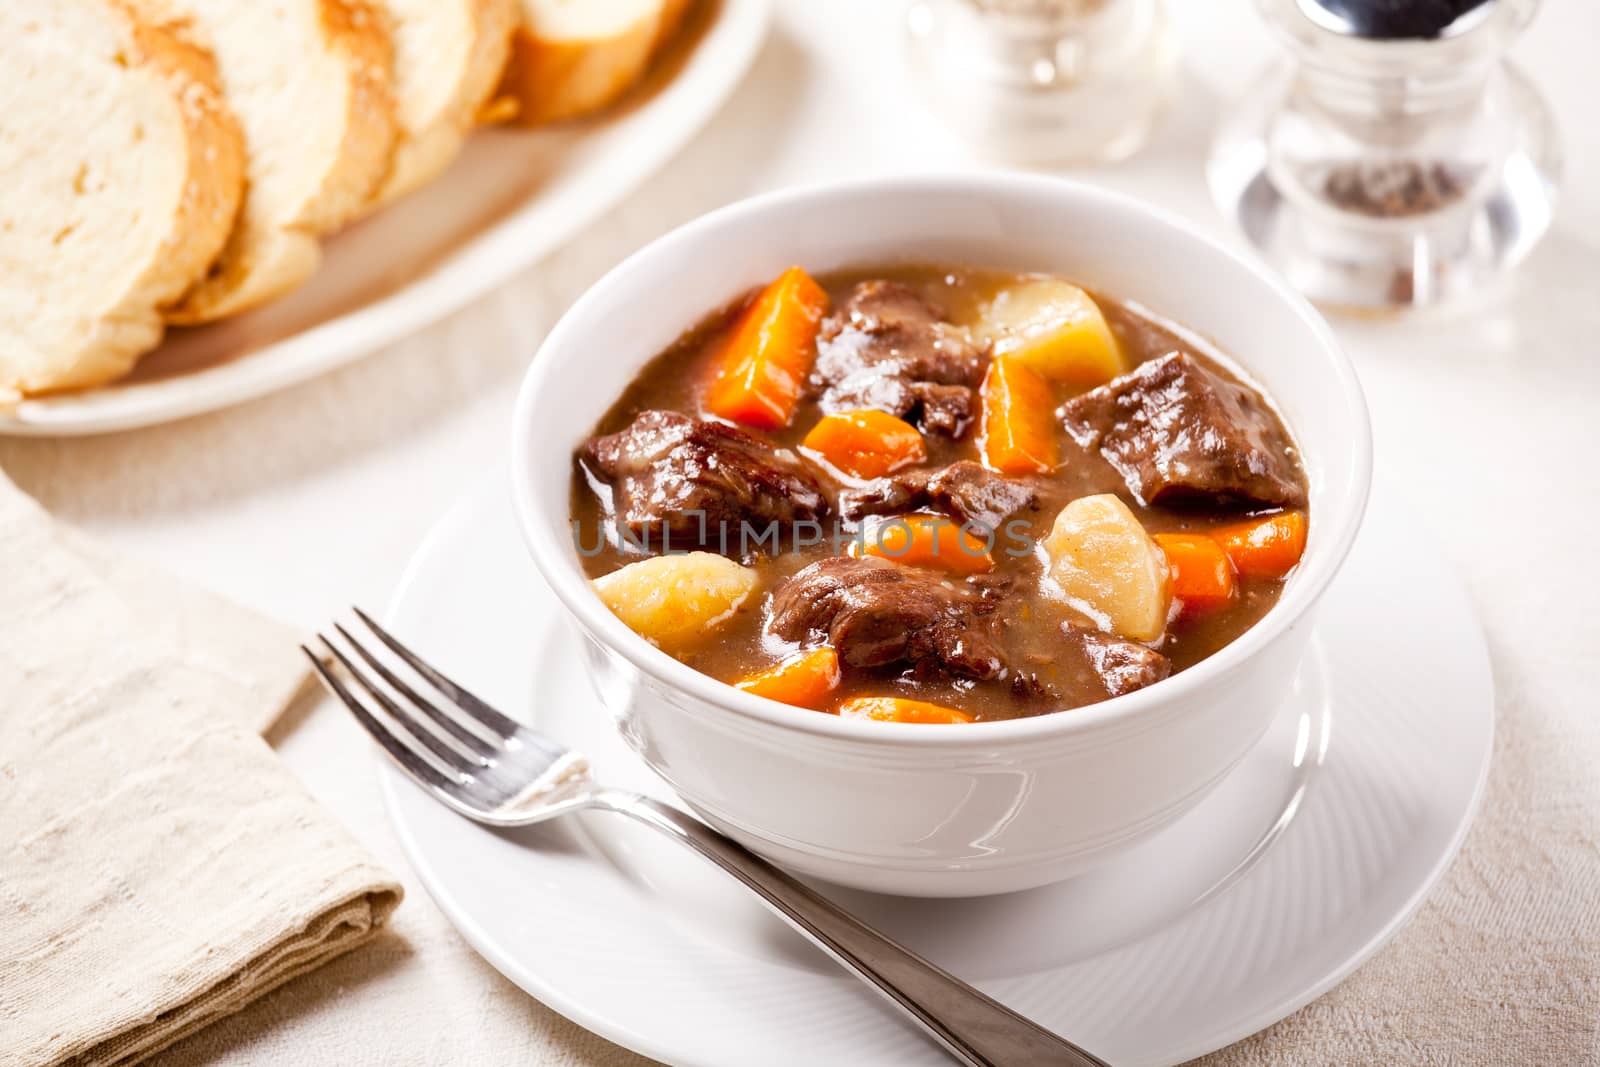 Homemade French Boeuf Bourguignon by mpessaris